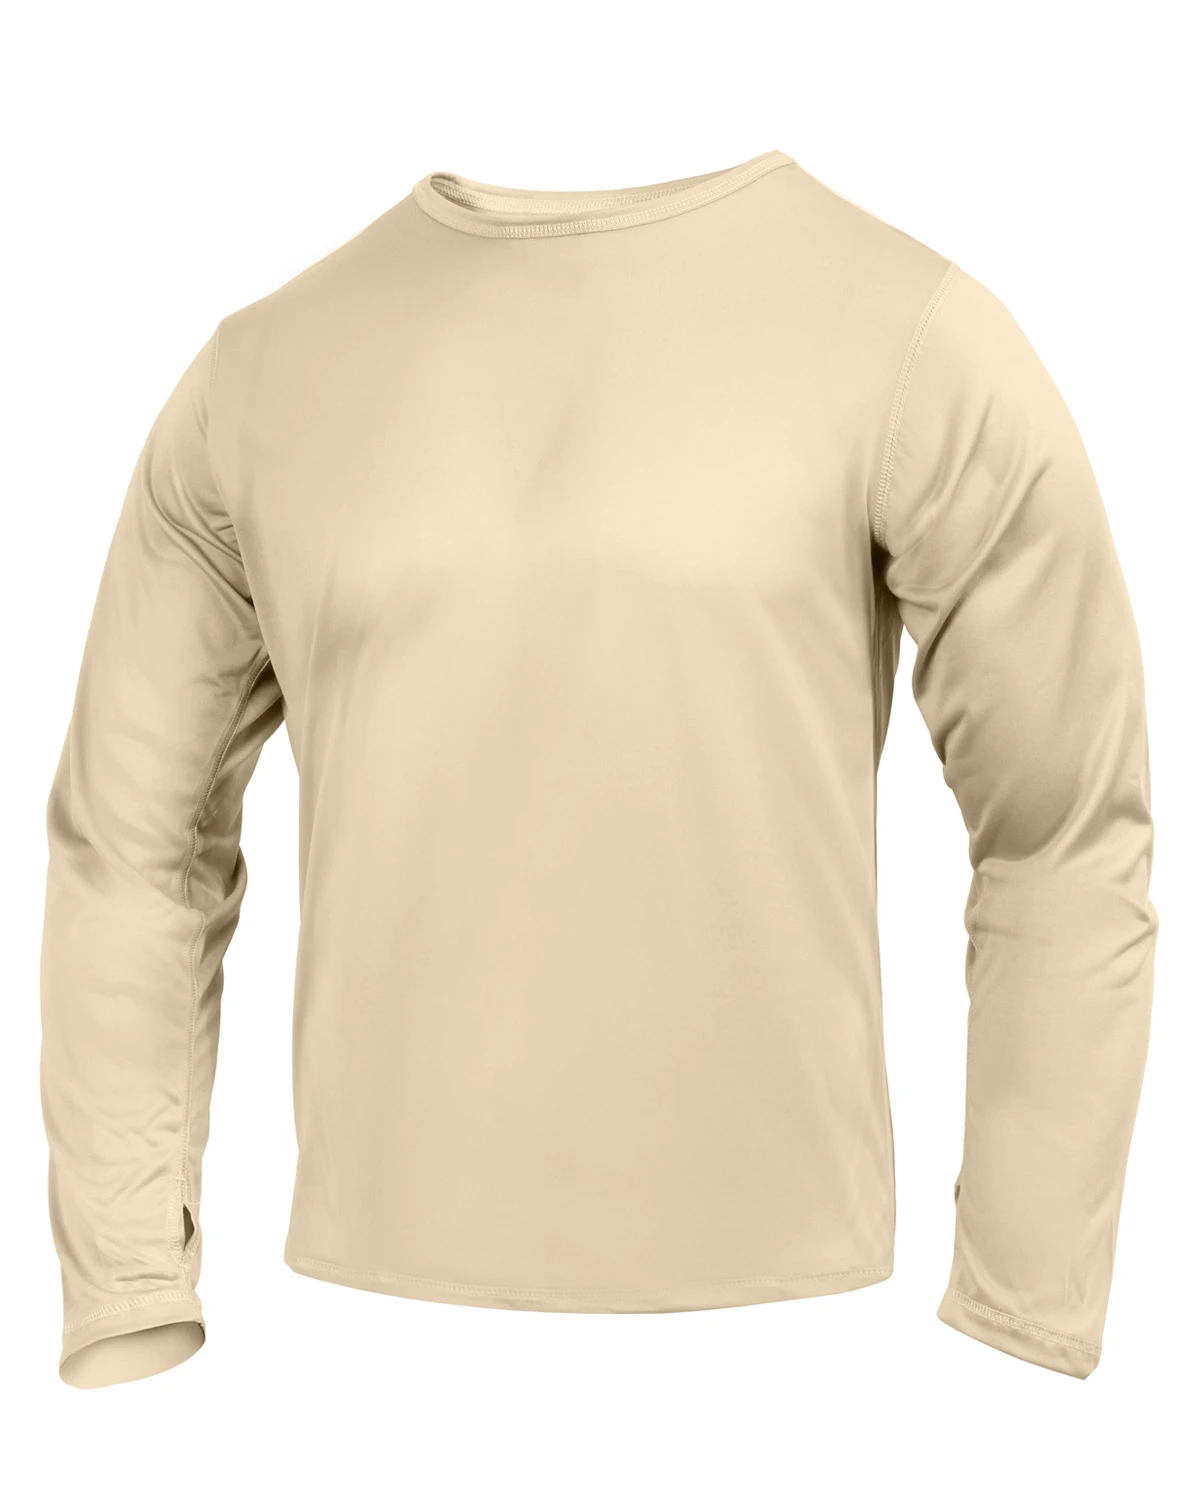 Buy Rothco Thermal Top ECWCS level 1 Next-to-skin